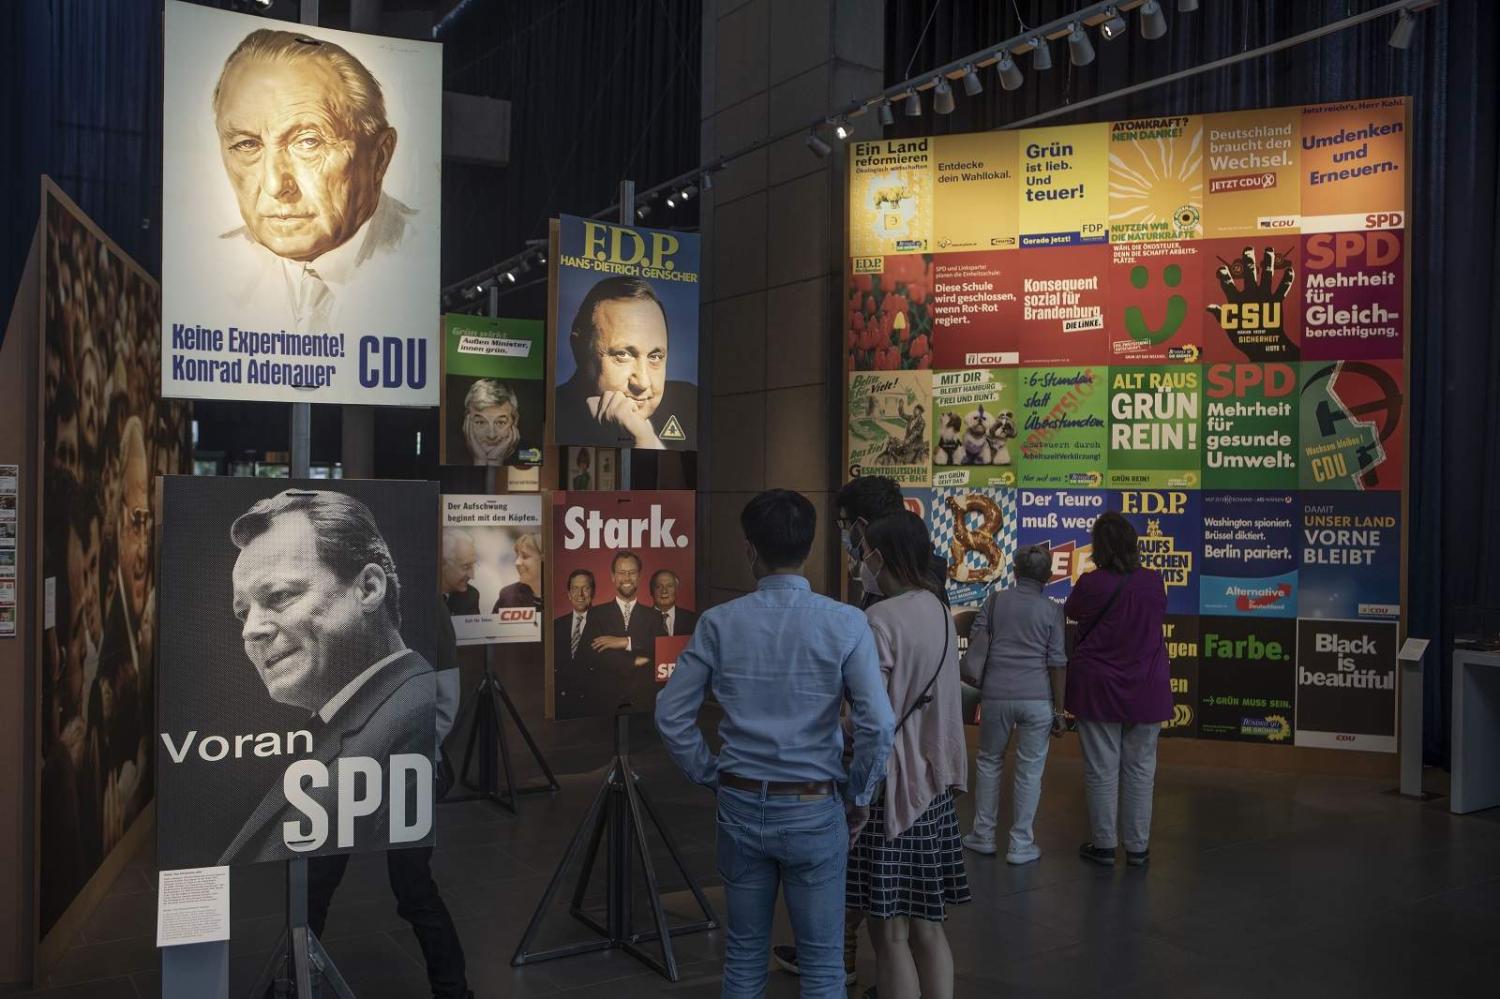 Historic election posters at the “Choose me!” exhibition in Bonn, July 2021 (Ulrich Baumgarten via Getty Image)